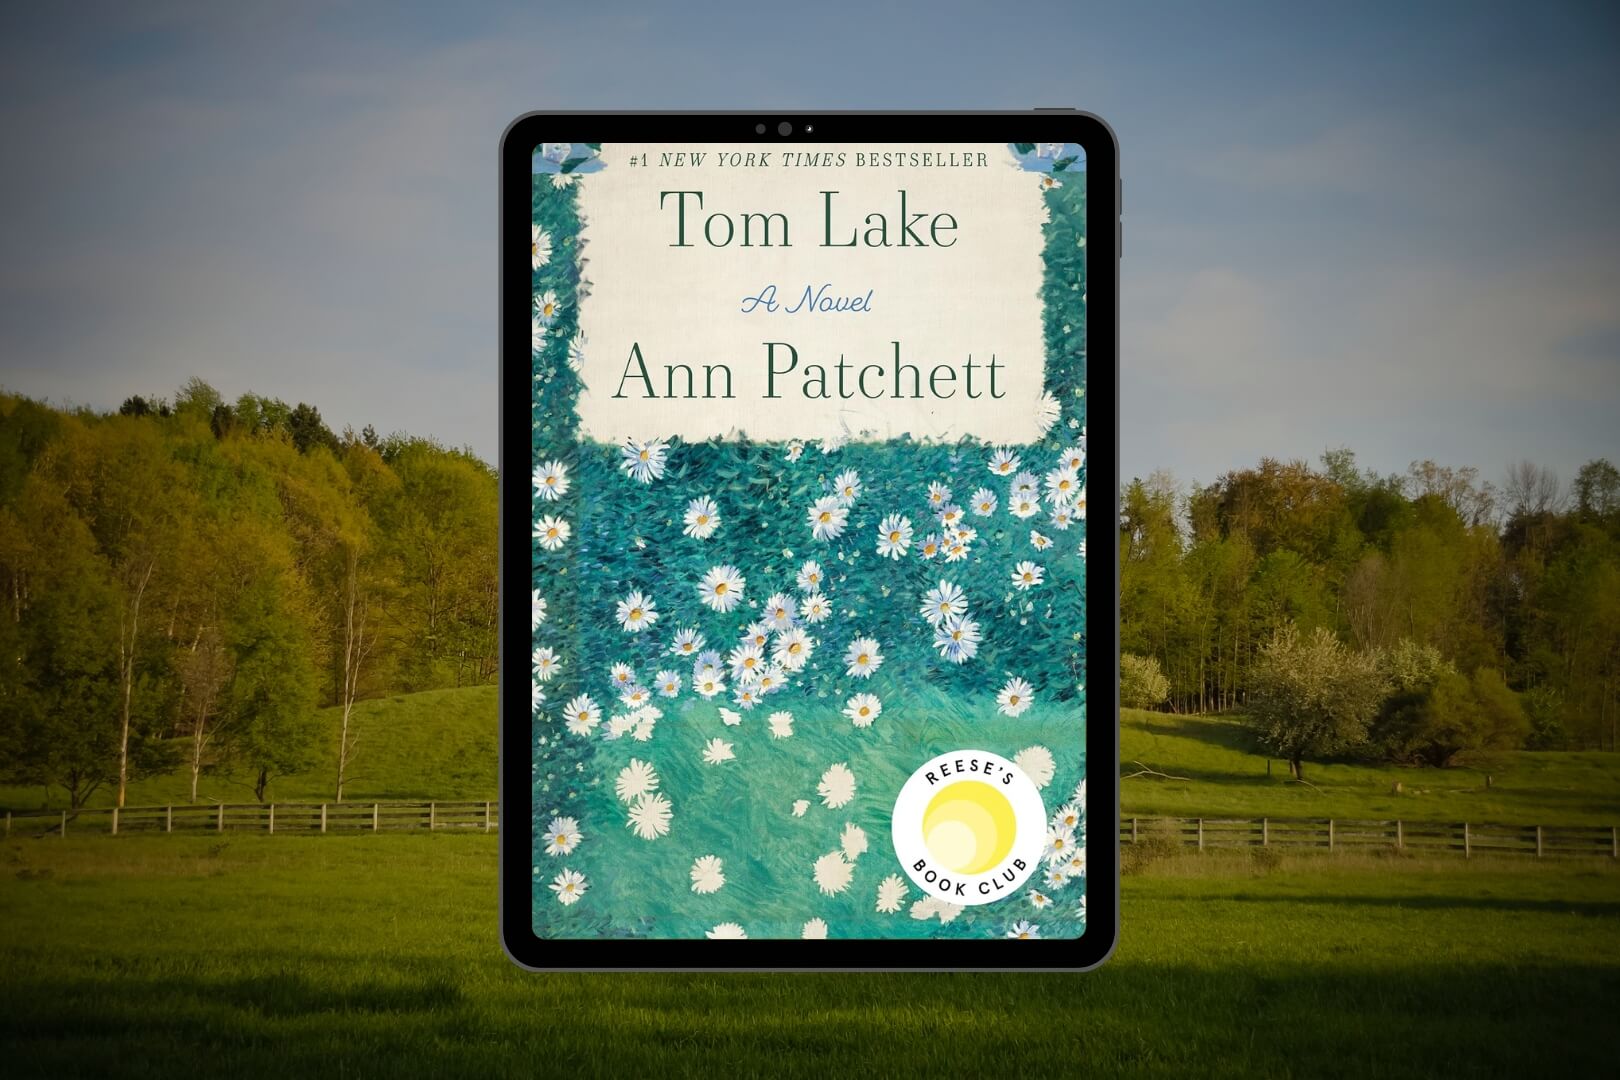 Book Club Questions for Tom Lake by Ann Patchett